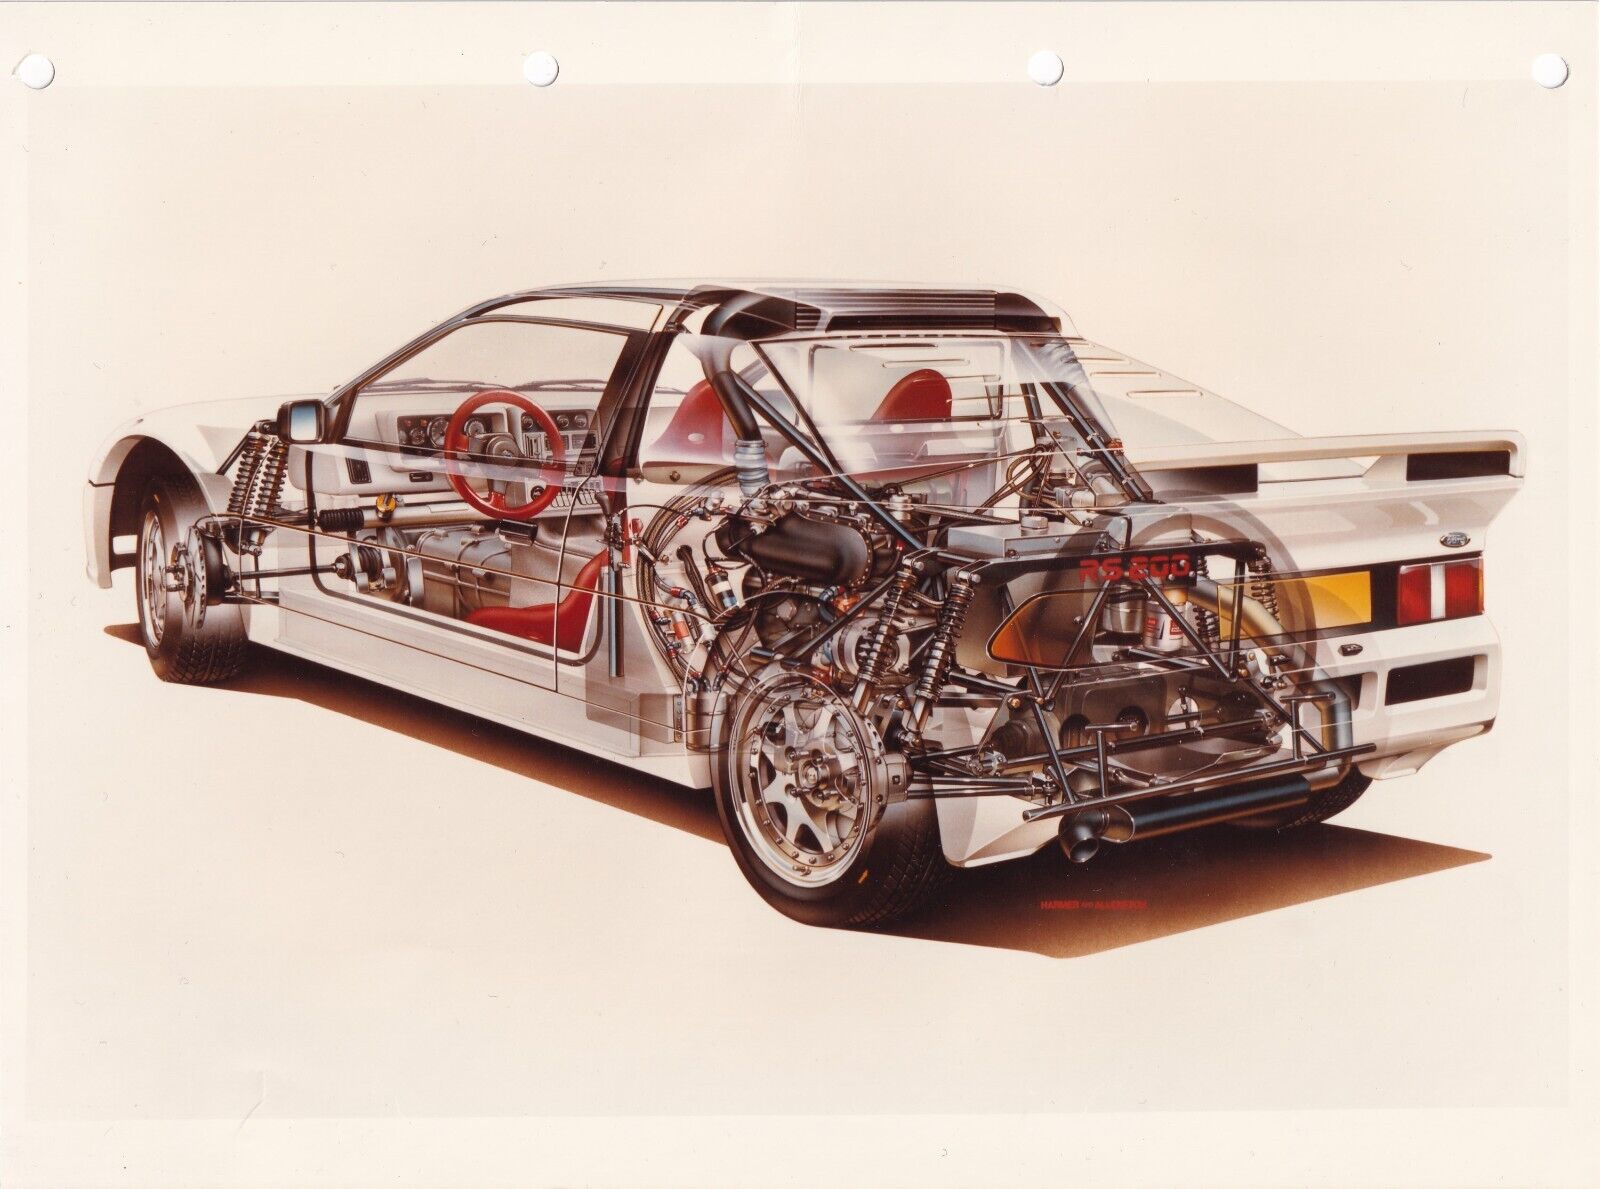 FORD RS200 L.H.D. SIDE, REAR, CUTAWAY TYPE COLOUR PHOTOGRAPH.